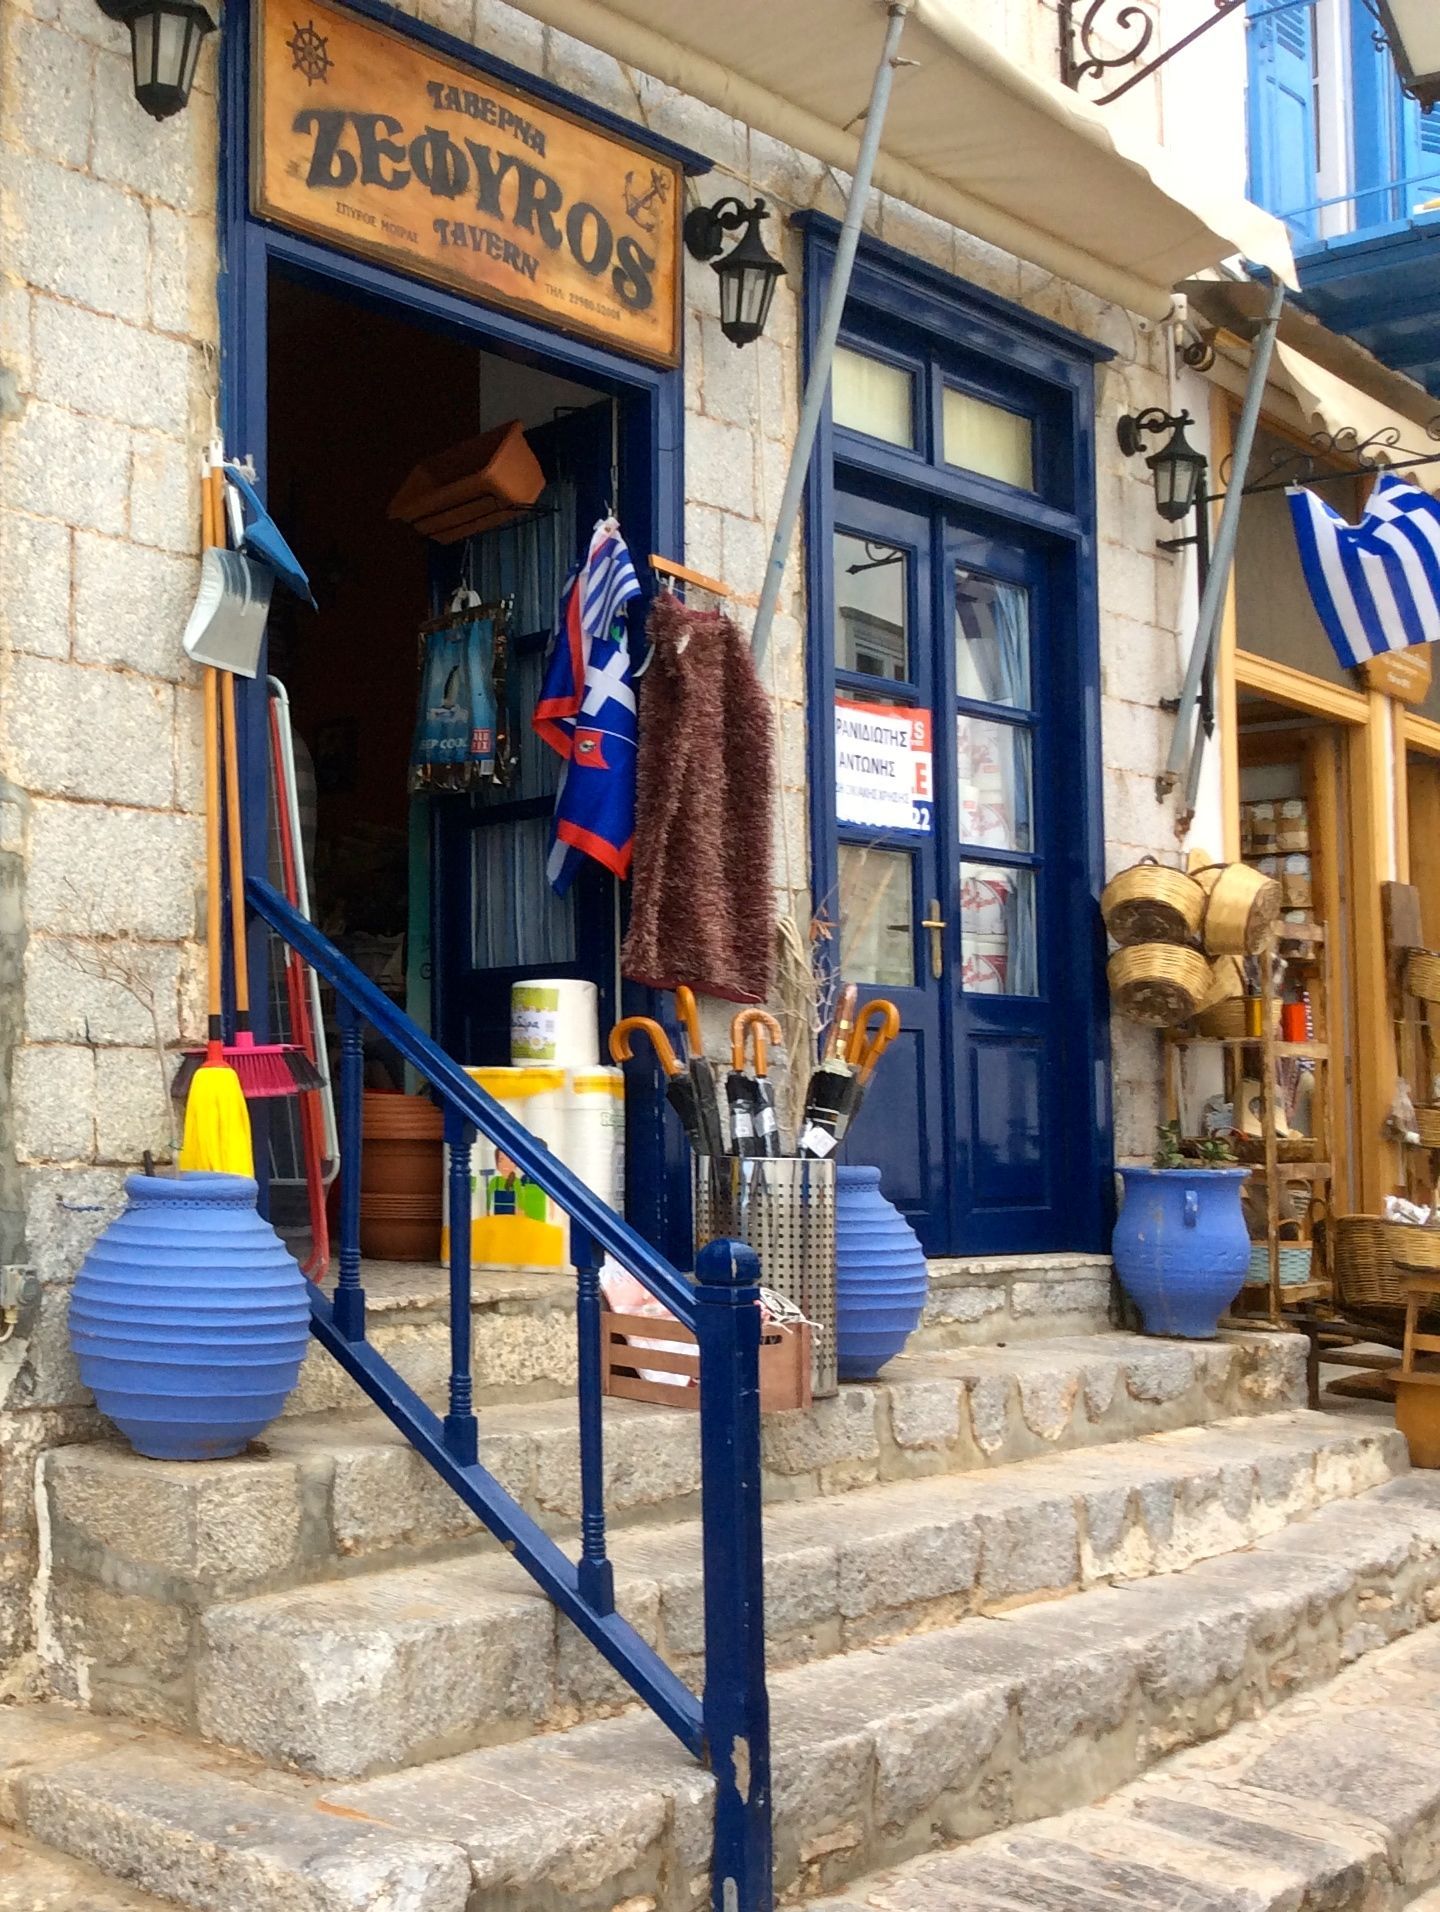 Temporary location of the Plastic Man's Shop in the old Zefyros Taverna on Miaoulis Street until January 2019.